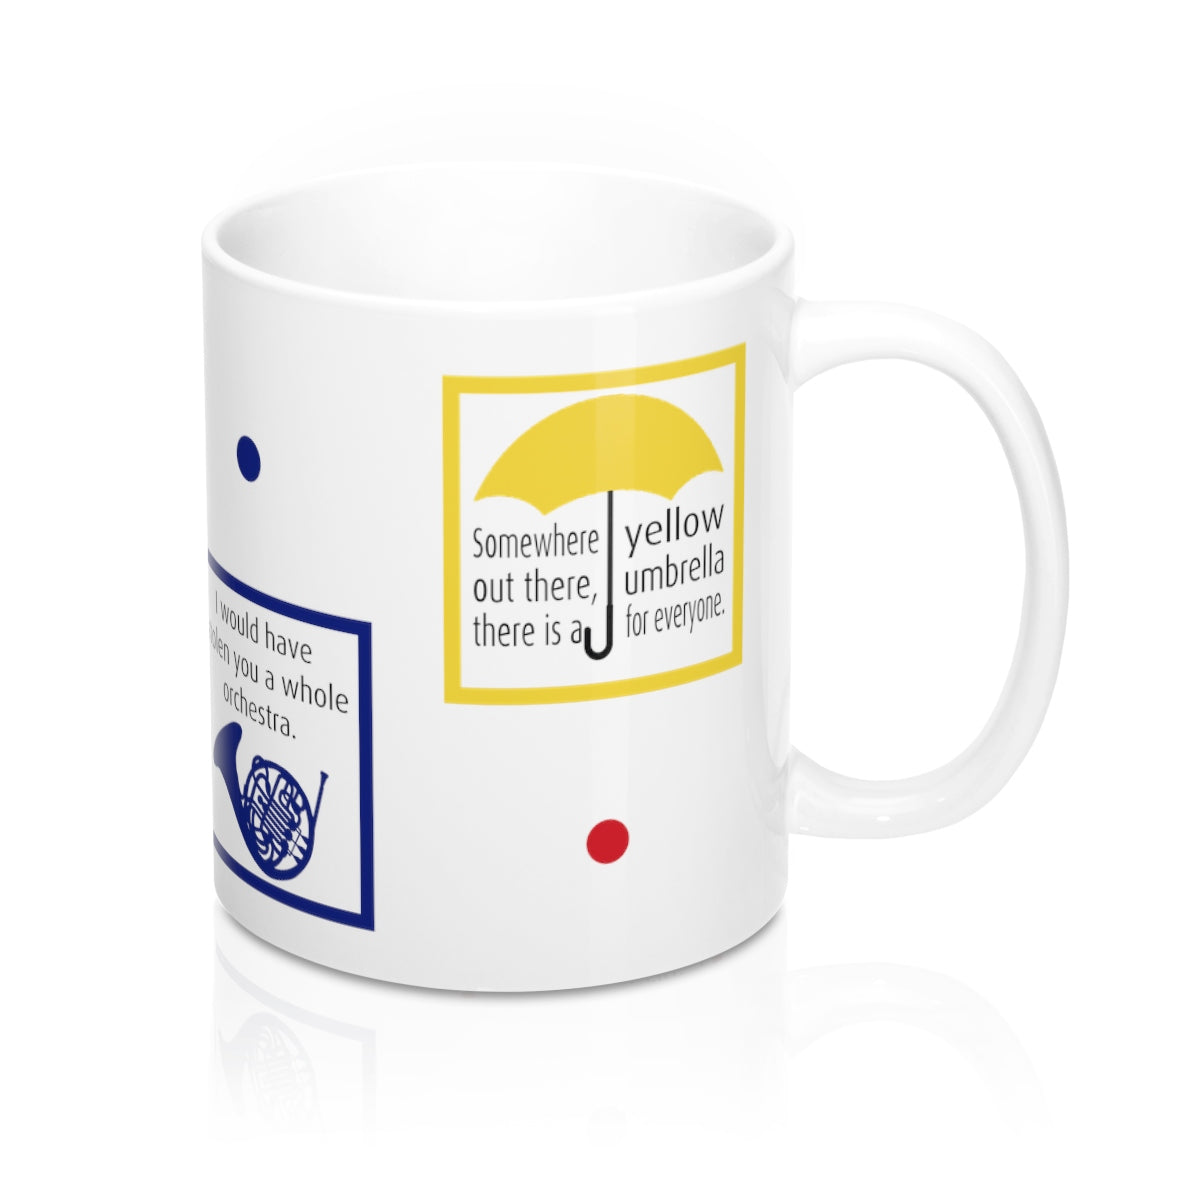 Double - Sided HIMYM Coffee Mug, 11 oz. Ceramic How I Met Your Mother Gift Mug - Yellow Umbrella, Blue French Horn, Barney's Ducky Tie Suit up and Ted's Red Cowboy Boots